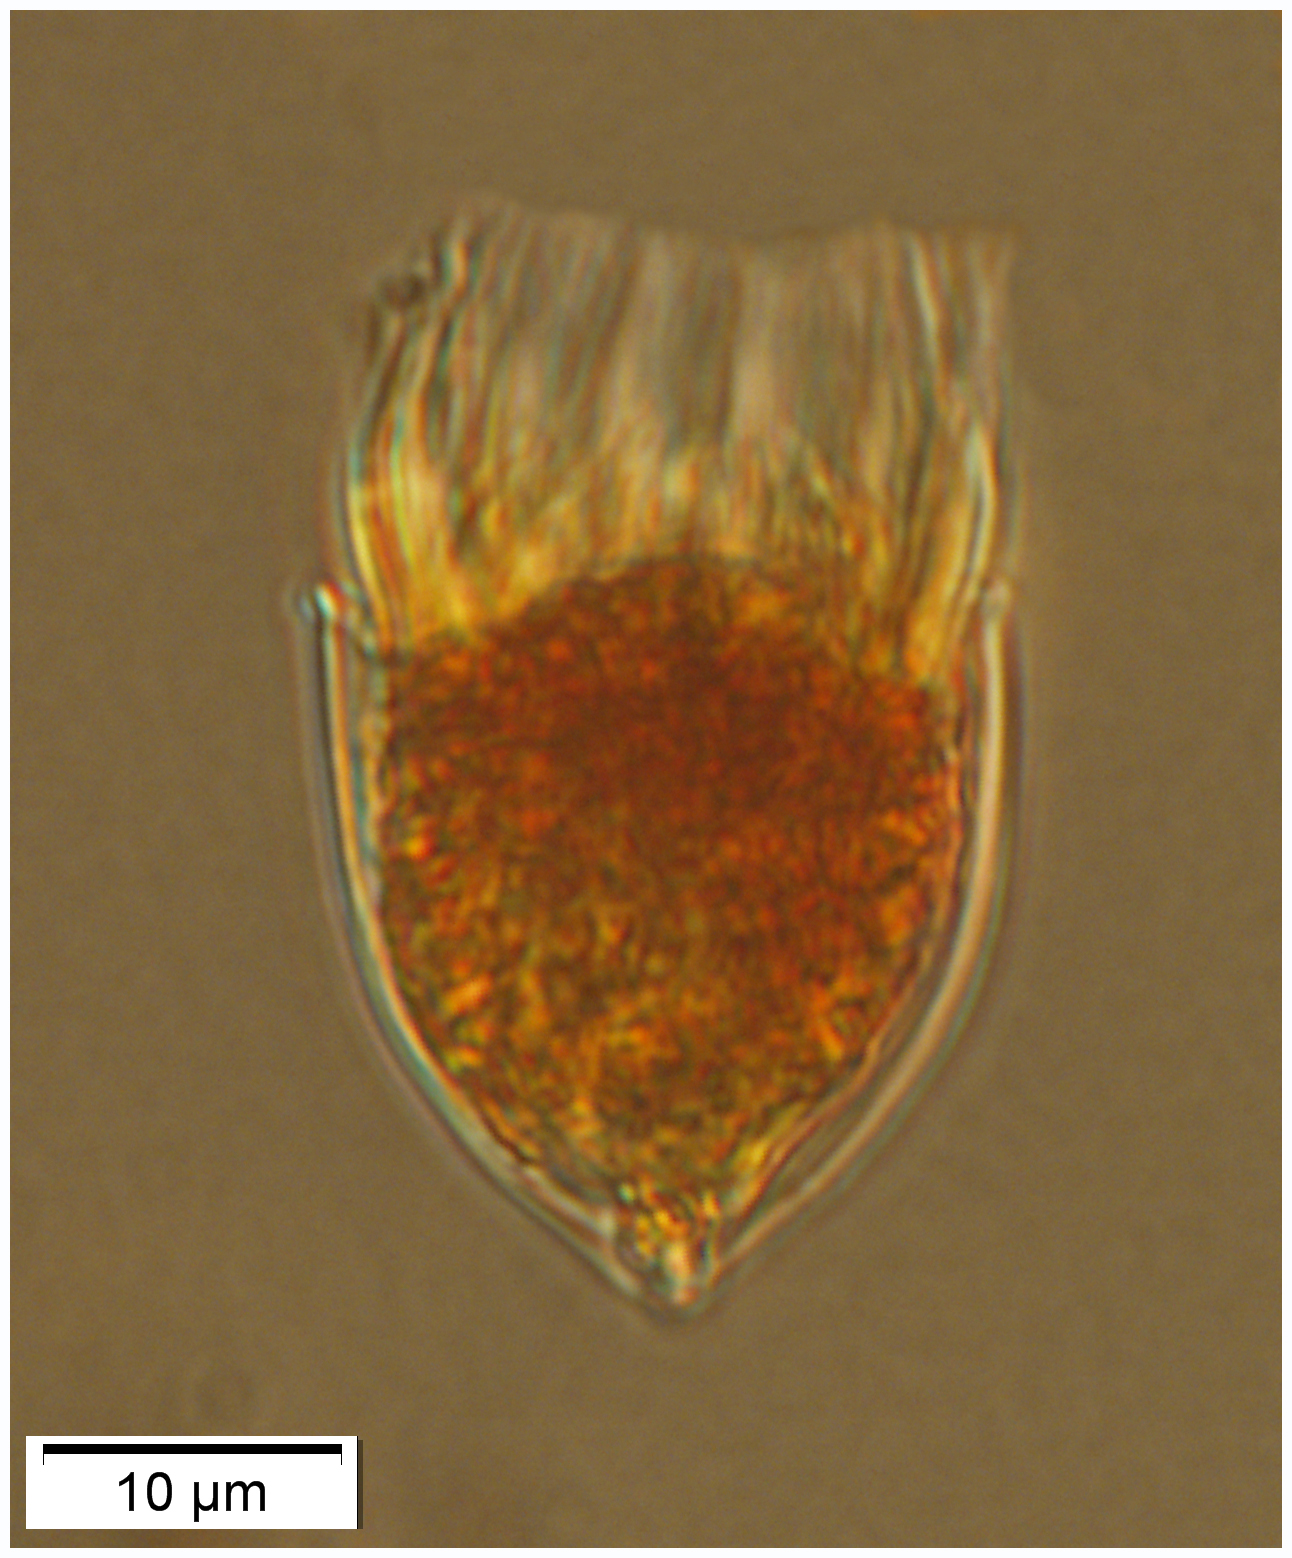 A new small Metacylis